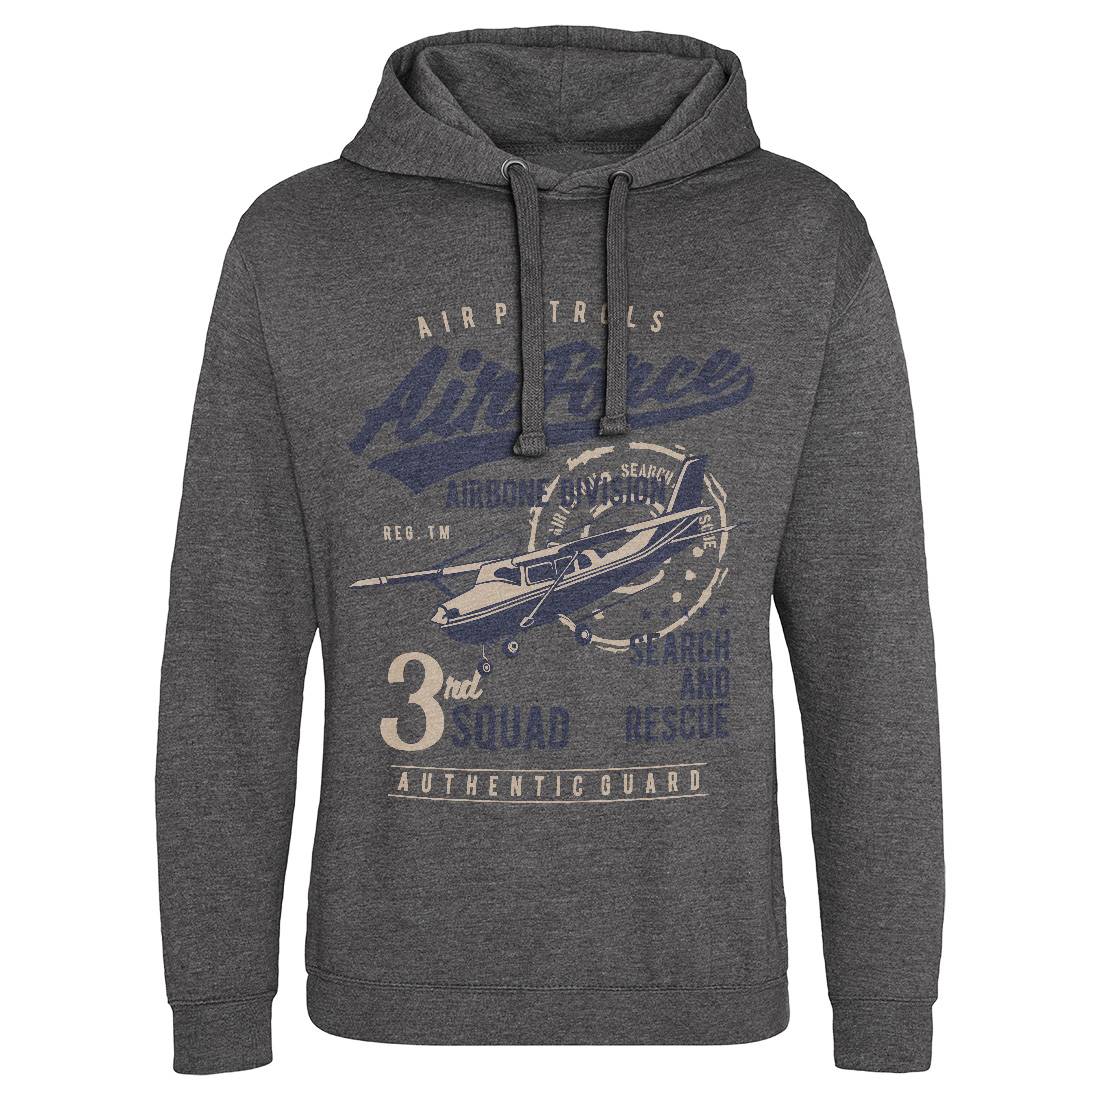 Air Force Mens Hoodie Without Pocket Army B176